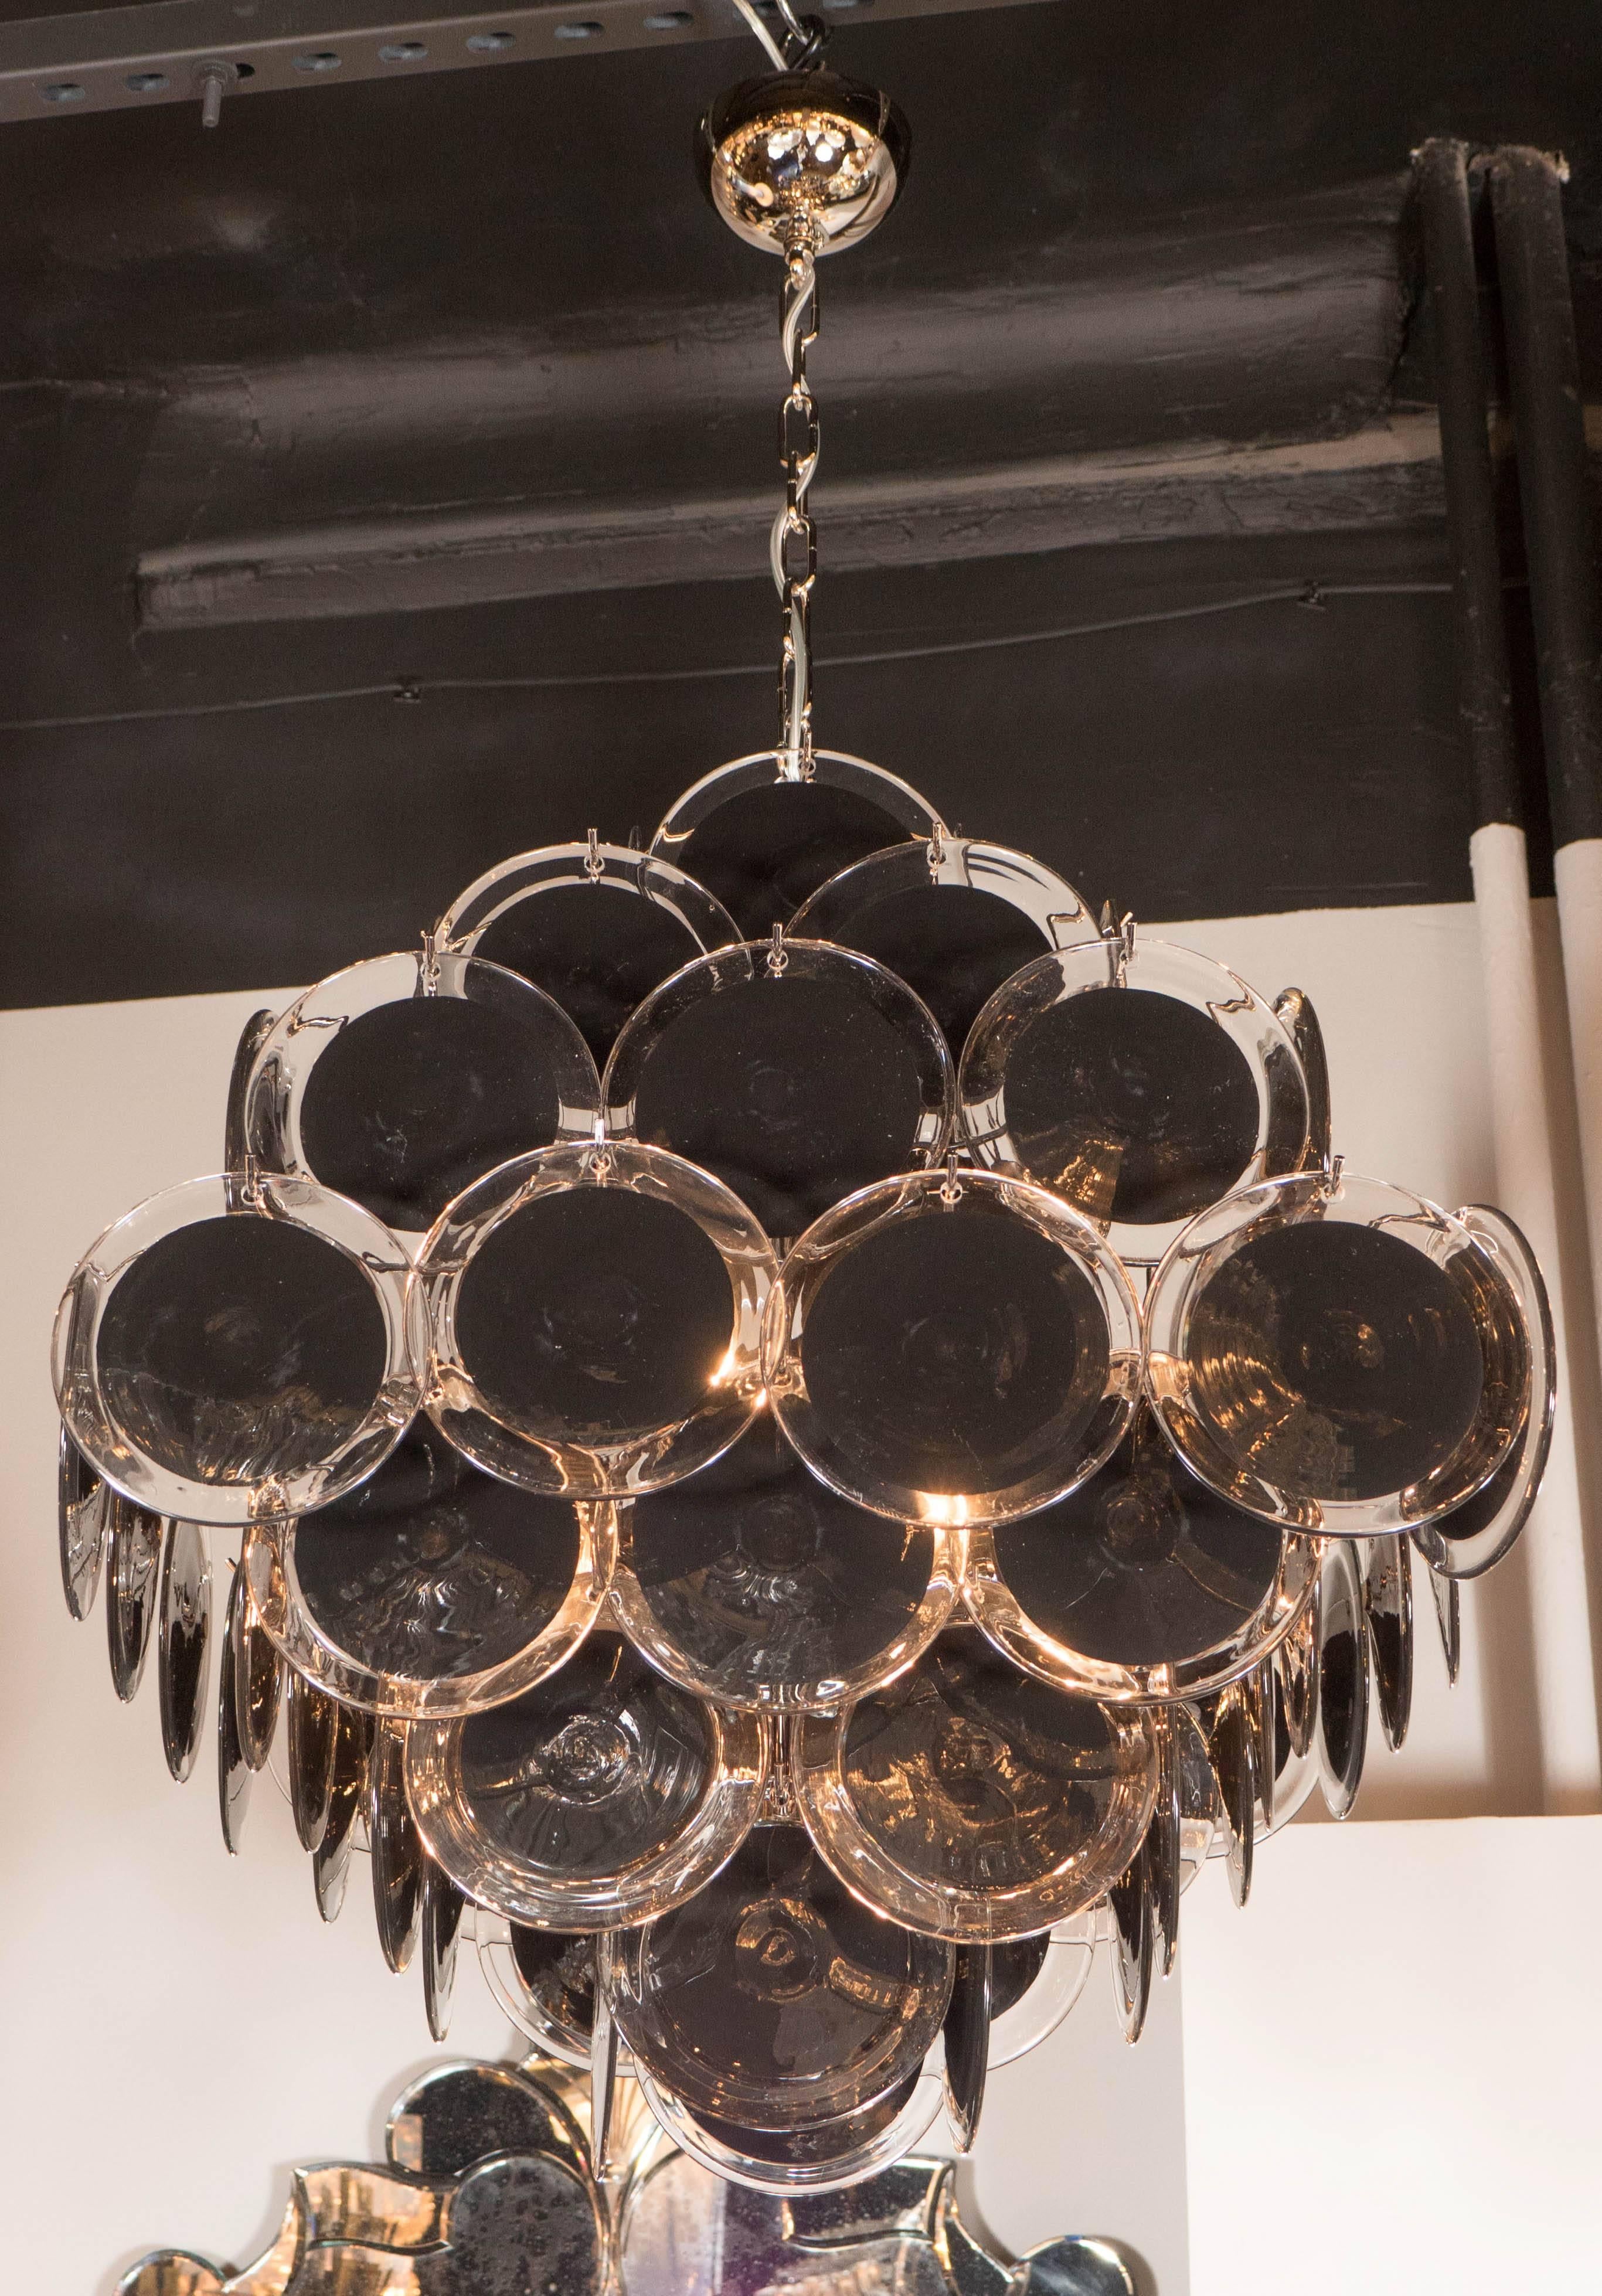 This chic Modernist chandelier by Vistosi displays 64 handblown black and clear Murano glass discs suspended in a diamond formation. Each disc is made by hand and incorporates a black center suspended in the glass. The fittings are polished chrome,